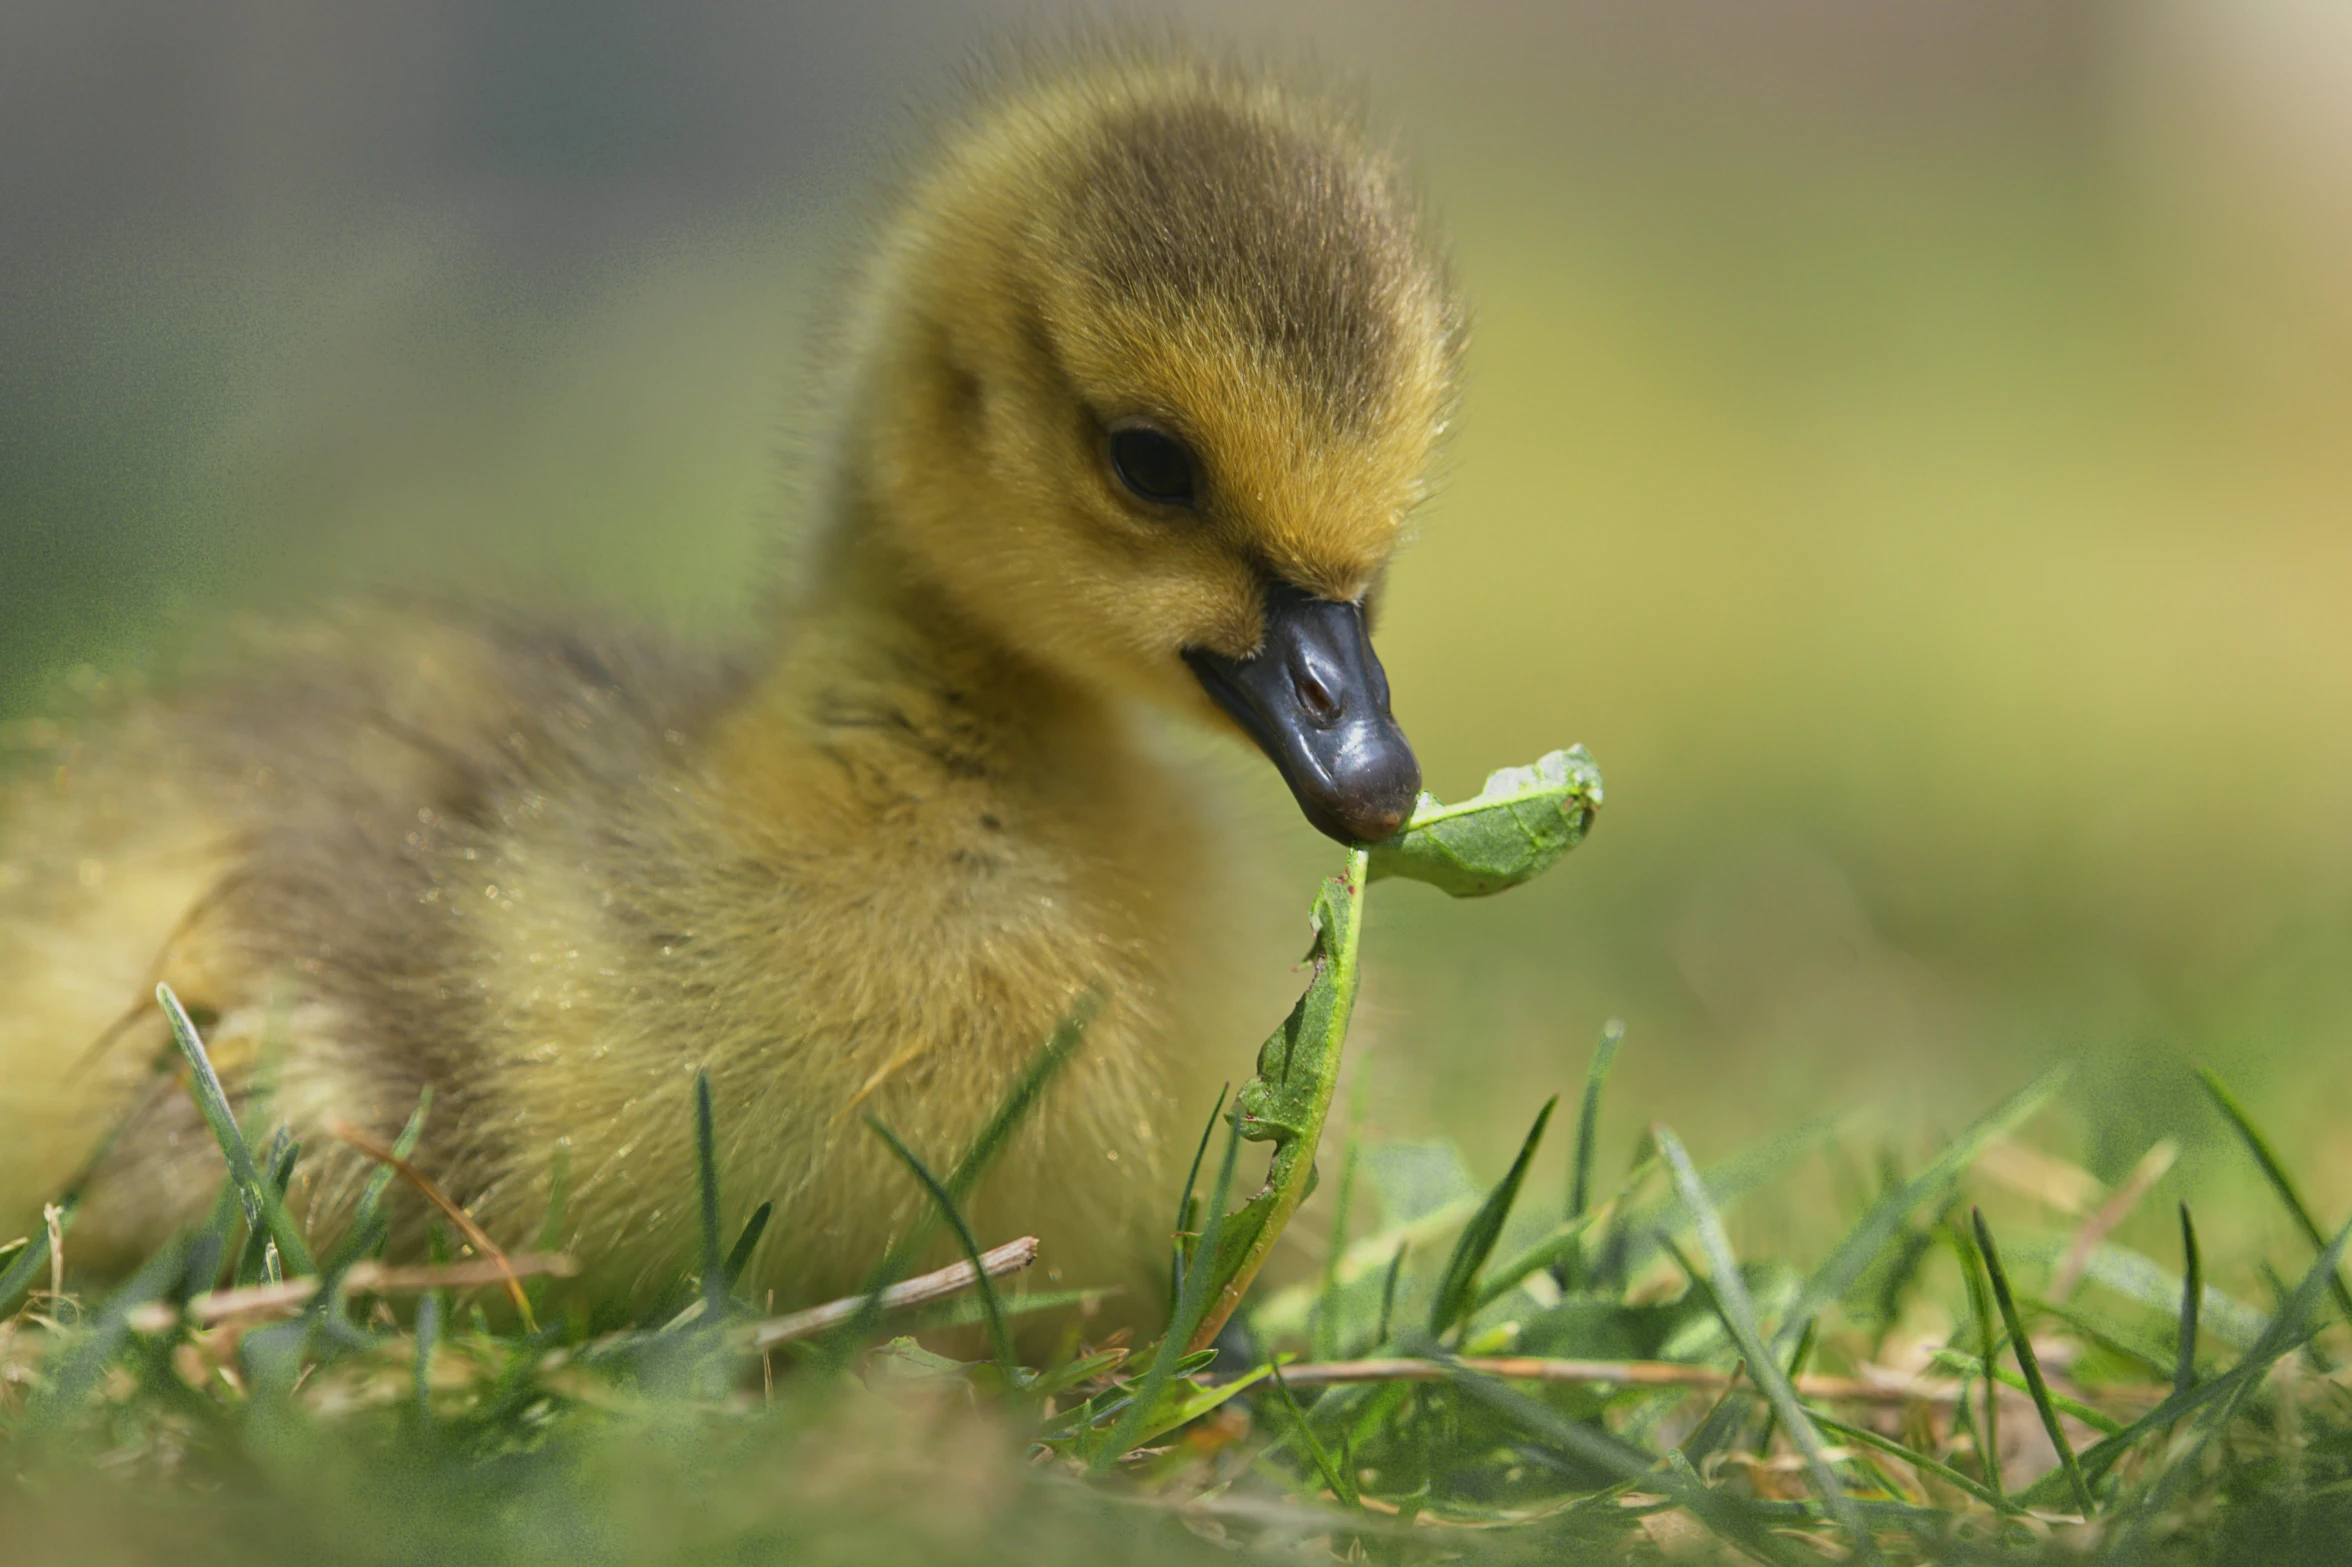 small duckling on grassy area with grass in its mouth